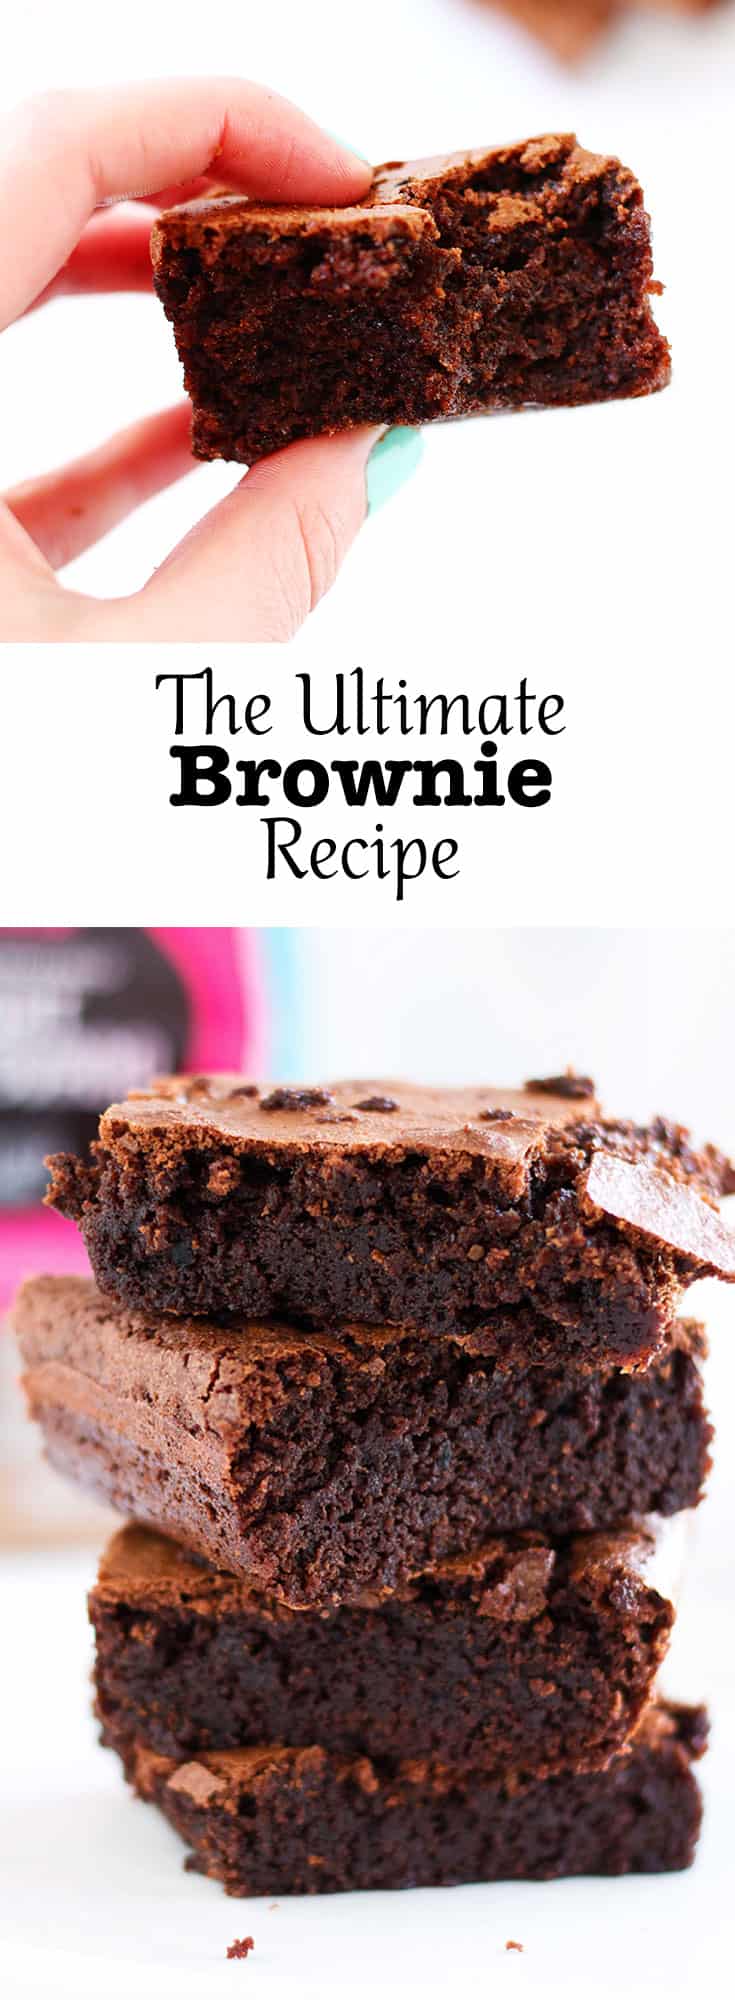 The Ultimate Brownie Recipe is the only brownie recipe you will ever need. The brownies are thick, chewy and super chocolatey. Made with unrefined sugars.